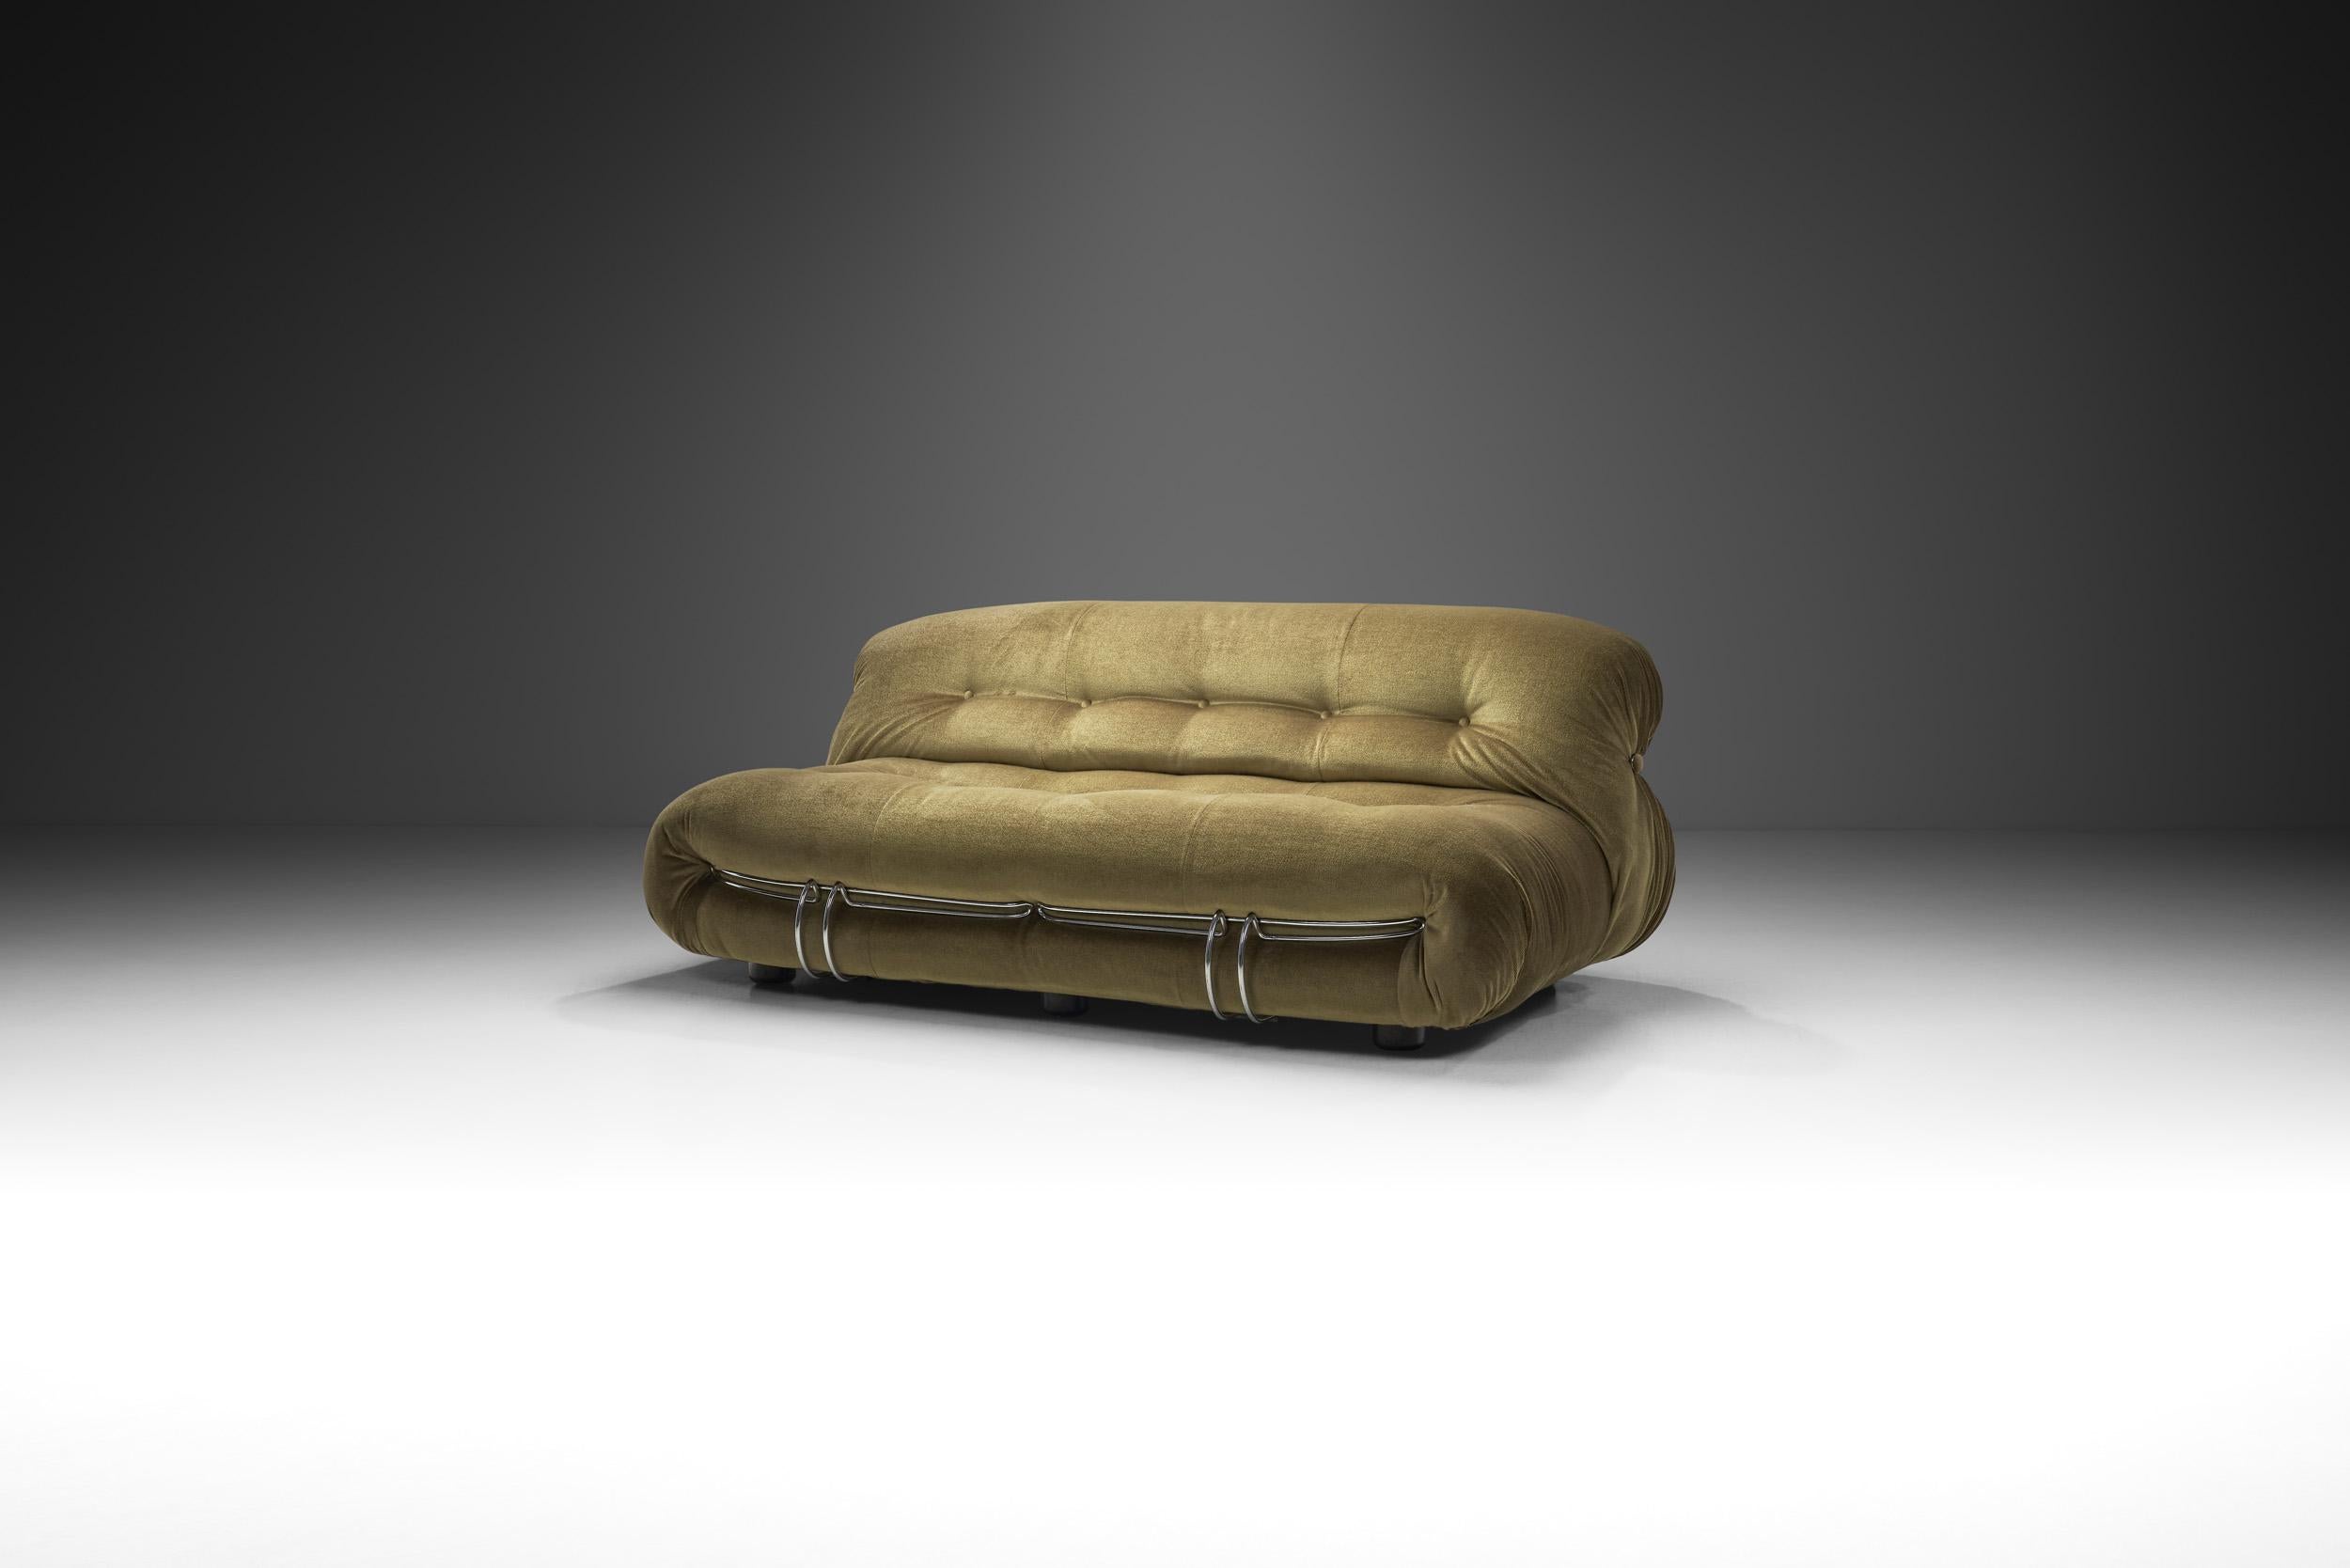 The iconic “Soriana” sofa was designed by the Italian designer duo, Afra and Tobia Scarpa in 1969. Besides its innovative manufacturing, visually, Soriana brings sophisticated and leisurely comfort to any home.

This post-modern two-seater sofa was